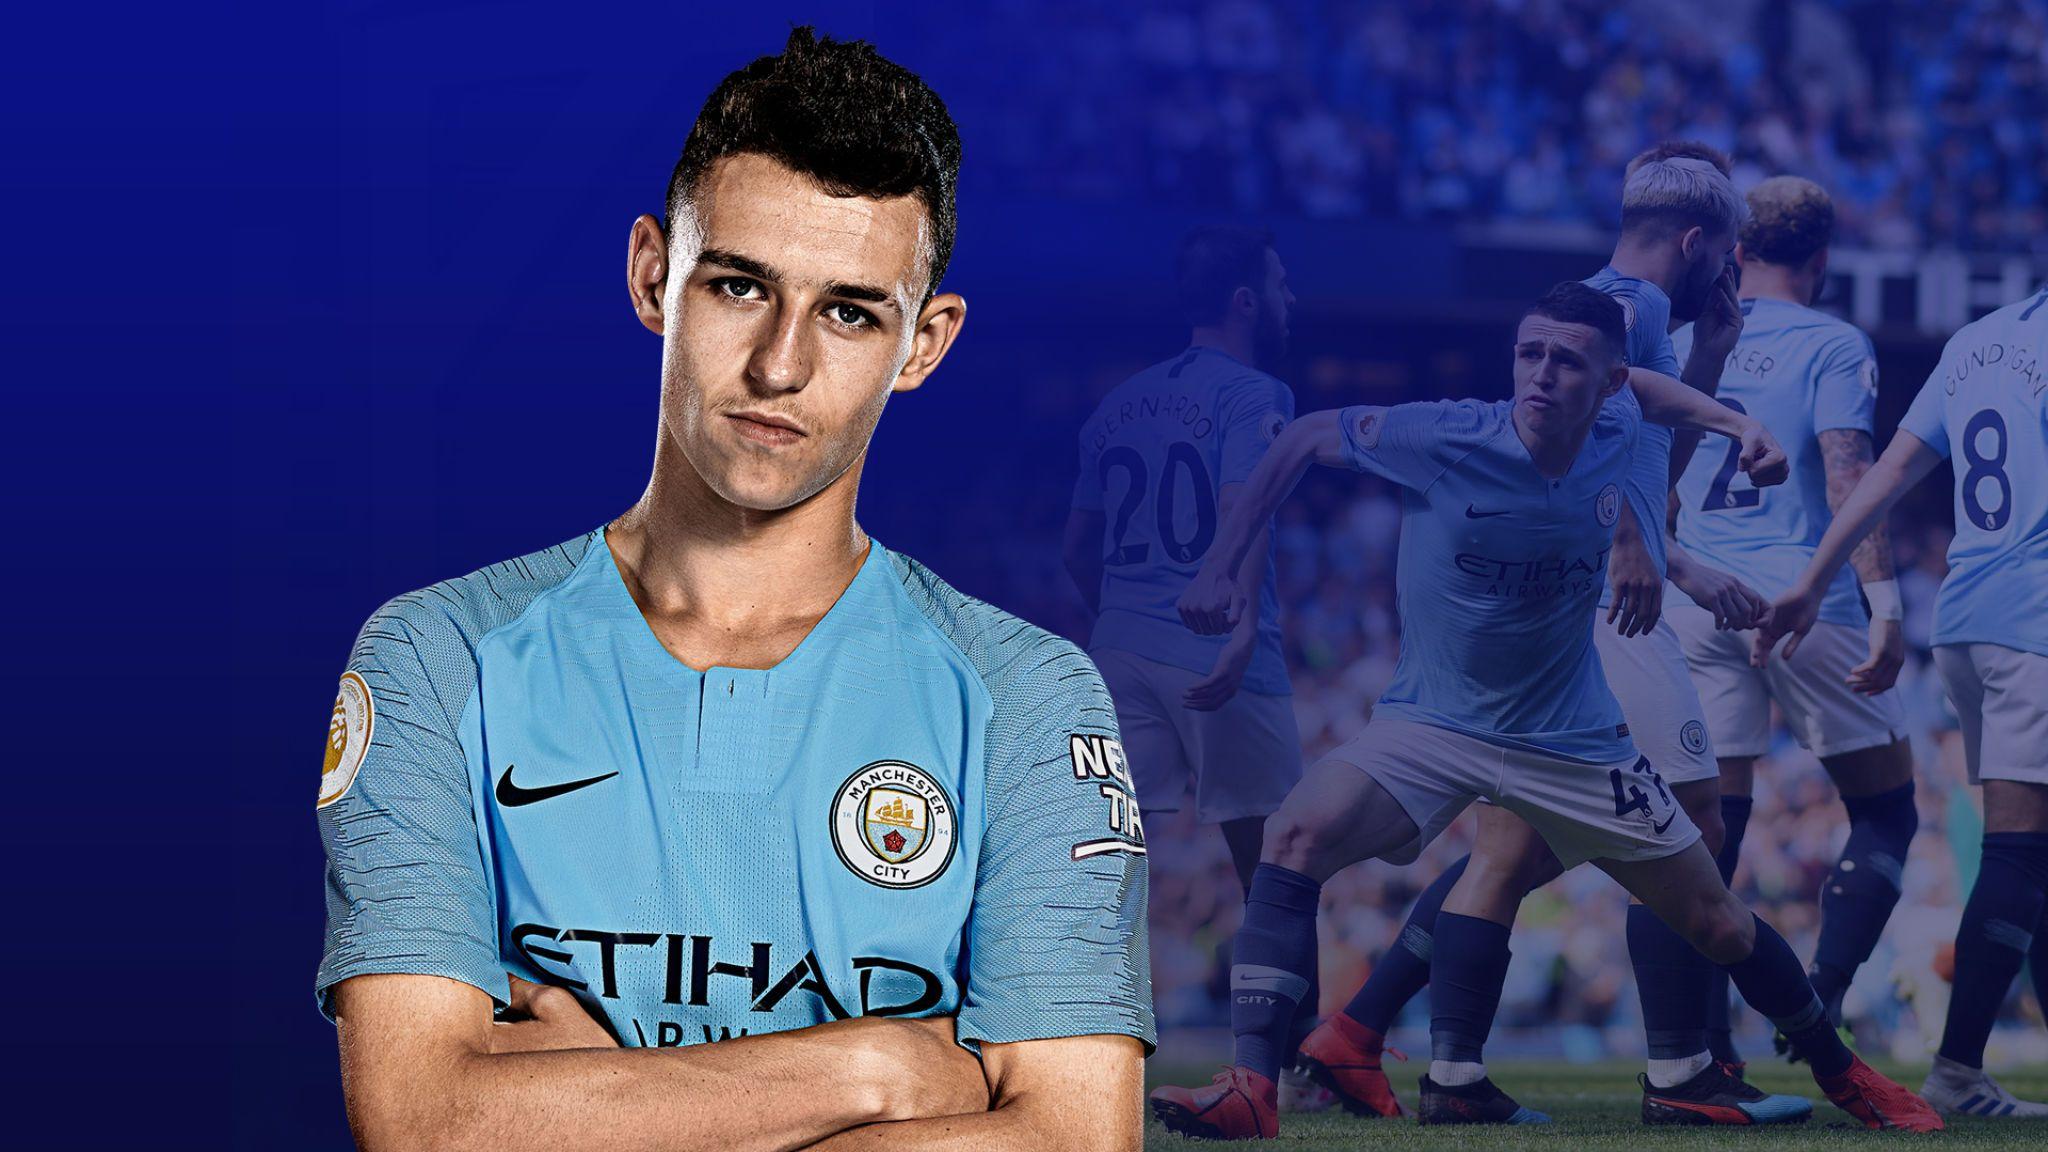 Phil Foden Wallpaper For PC.